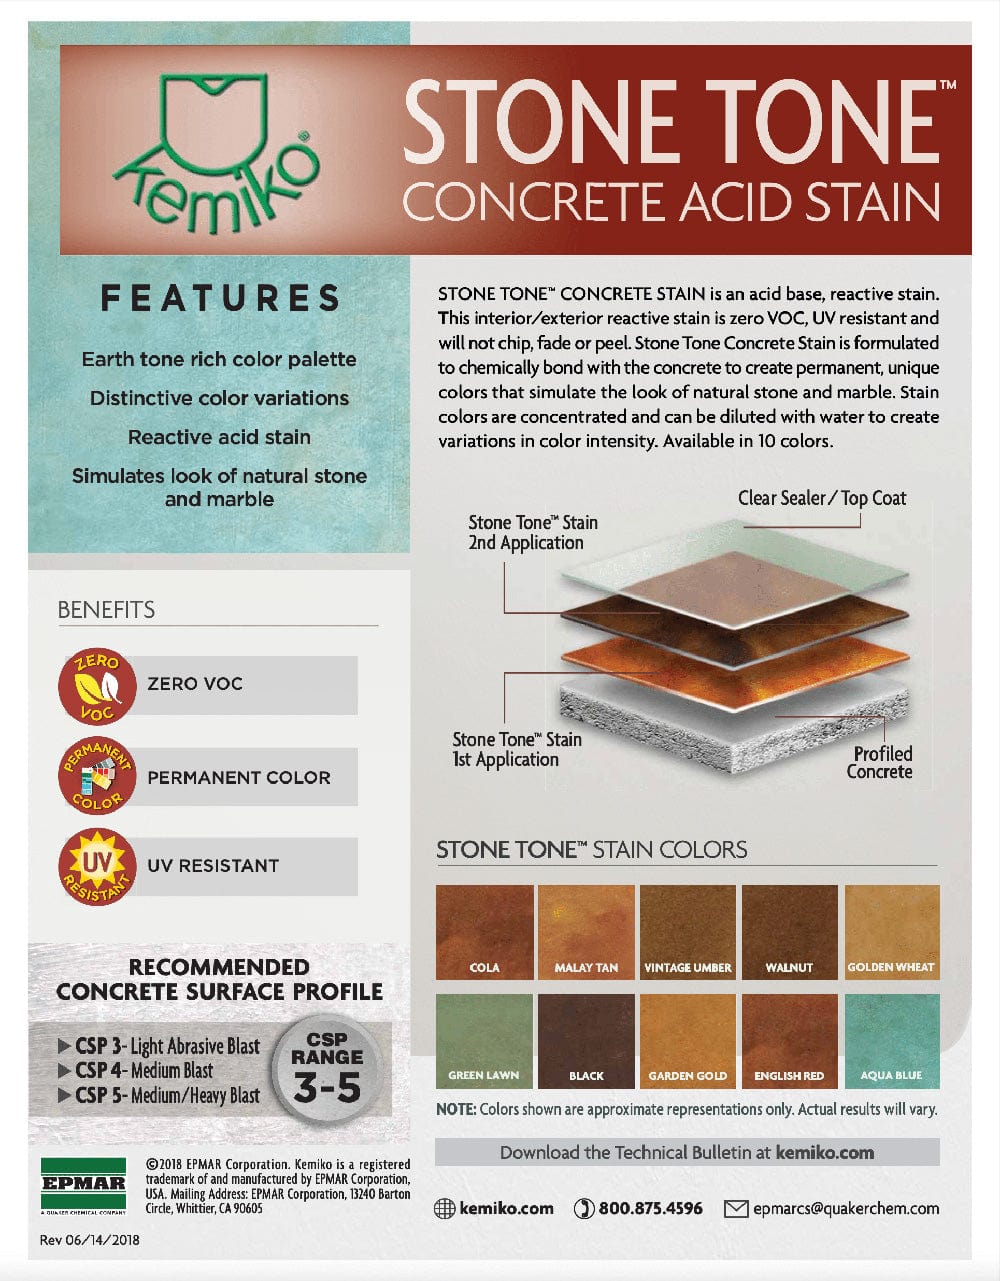 Stone Tone Concrete Stain - Xtreme Polishing Systems - kemiko acid stain, kemiko concrete stain, kemiko stone tone concrete stain - concrete floor staining, stained concrete colors